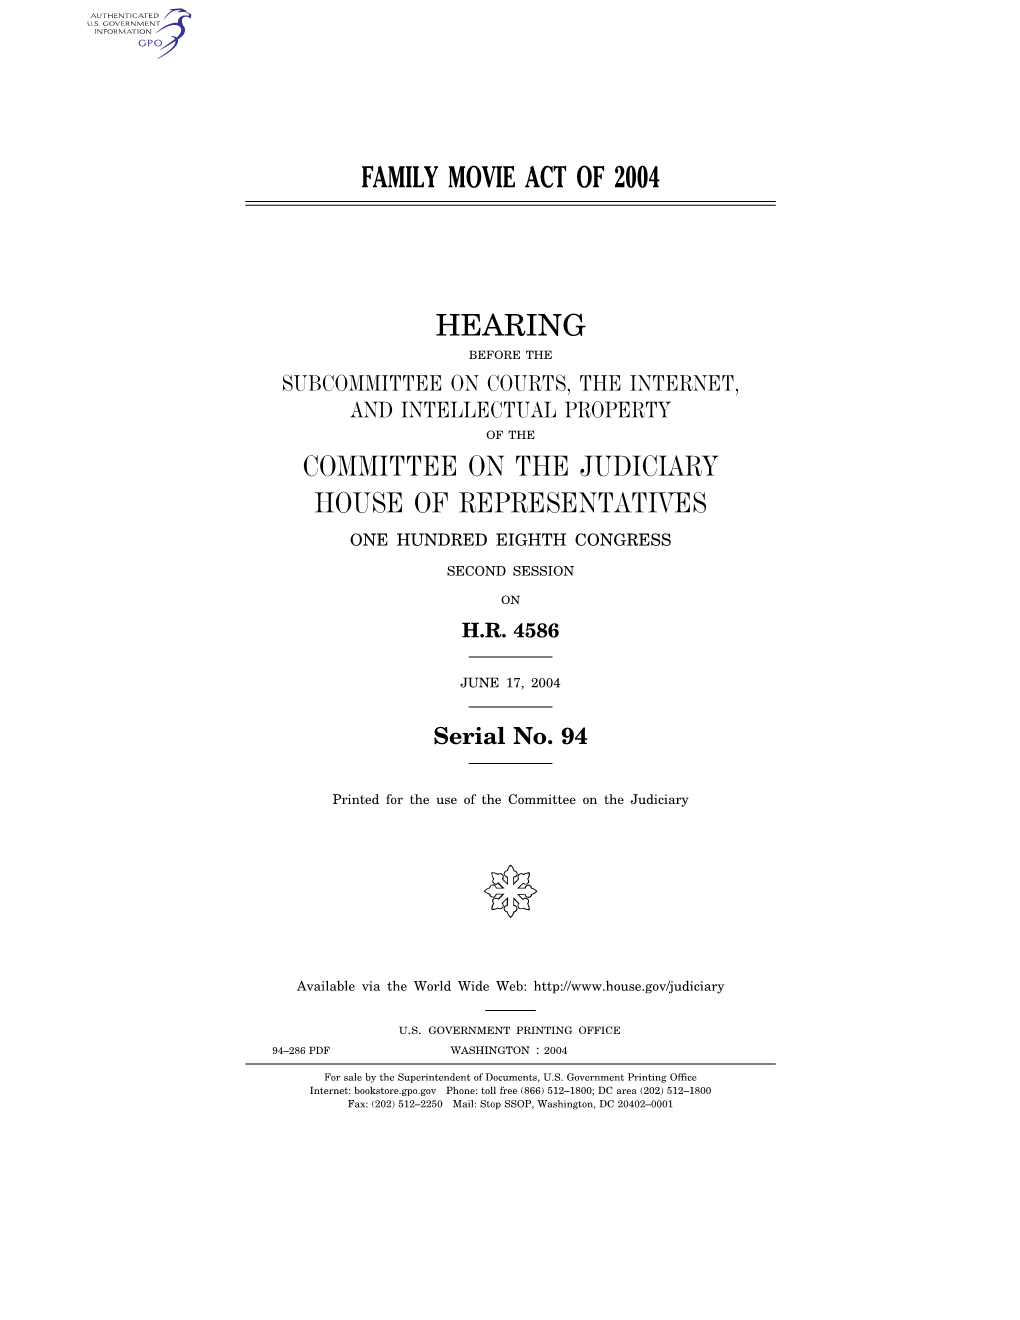 Family Movie Act of 2004 Hearing Committee on The